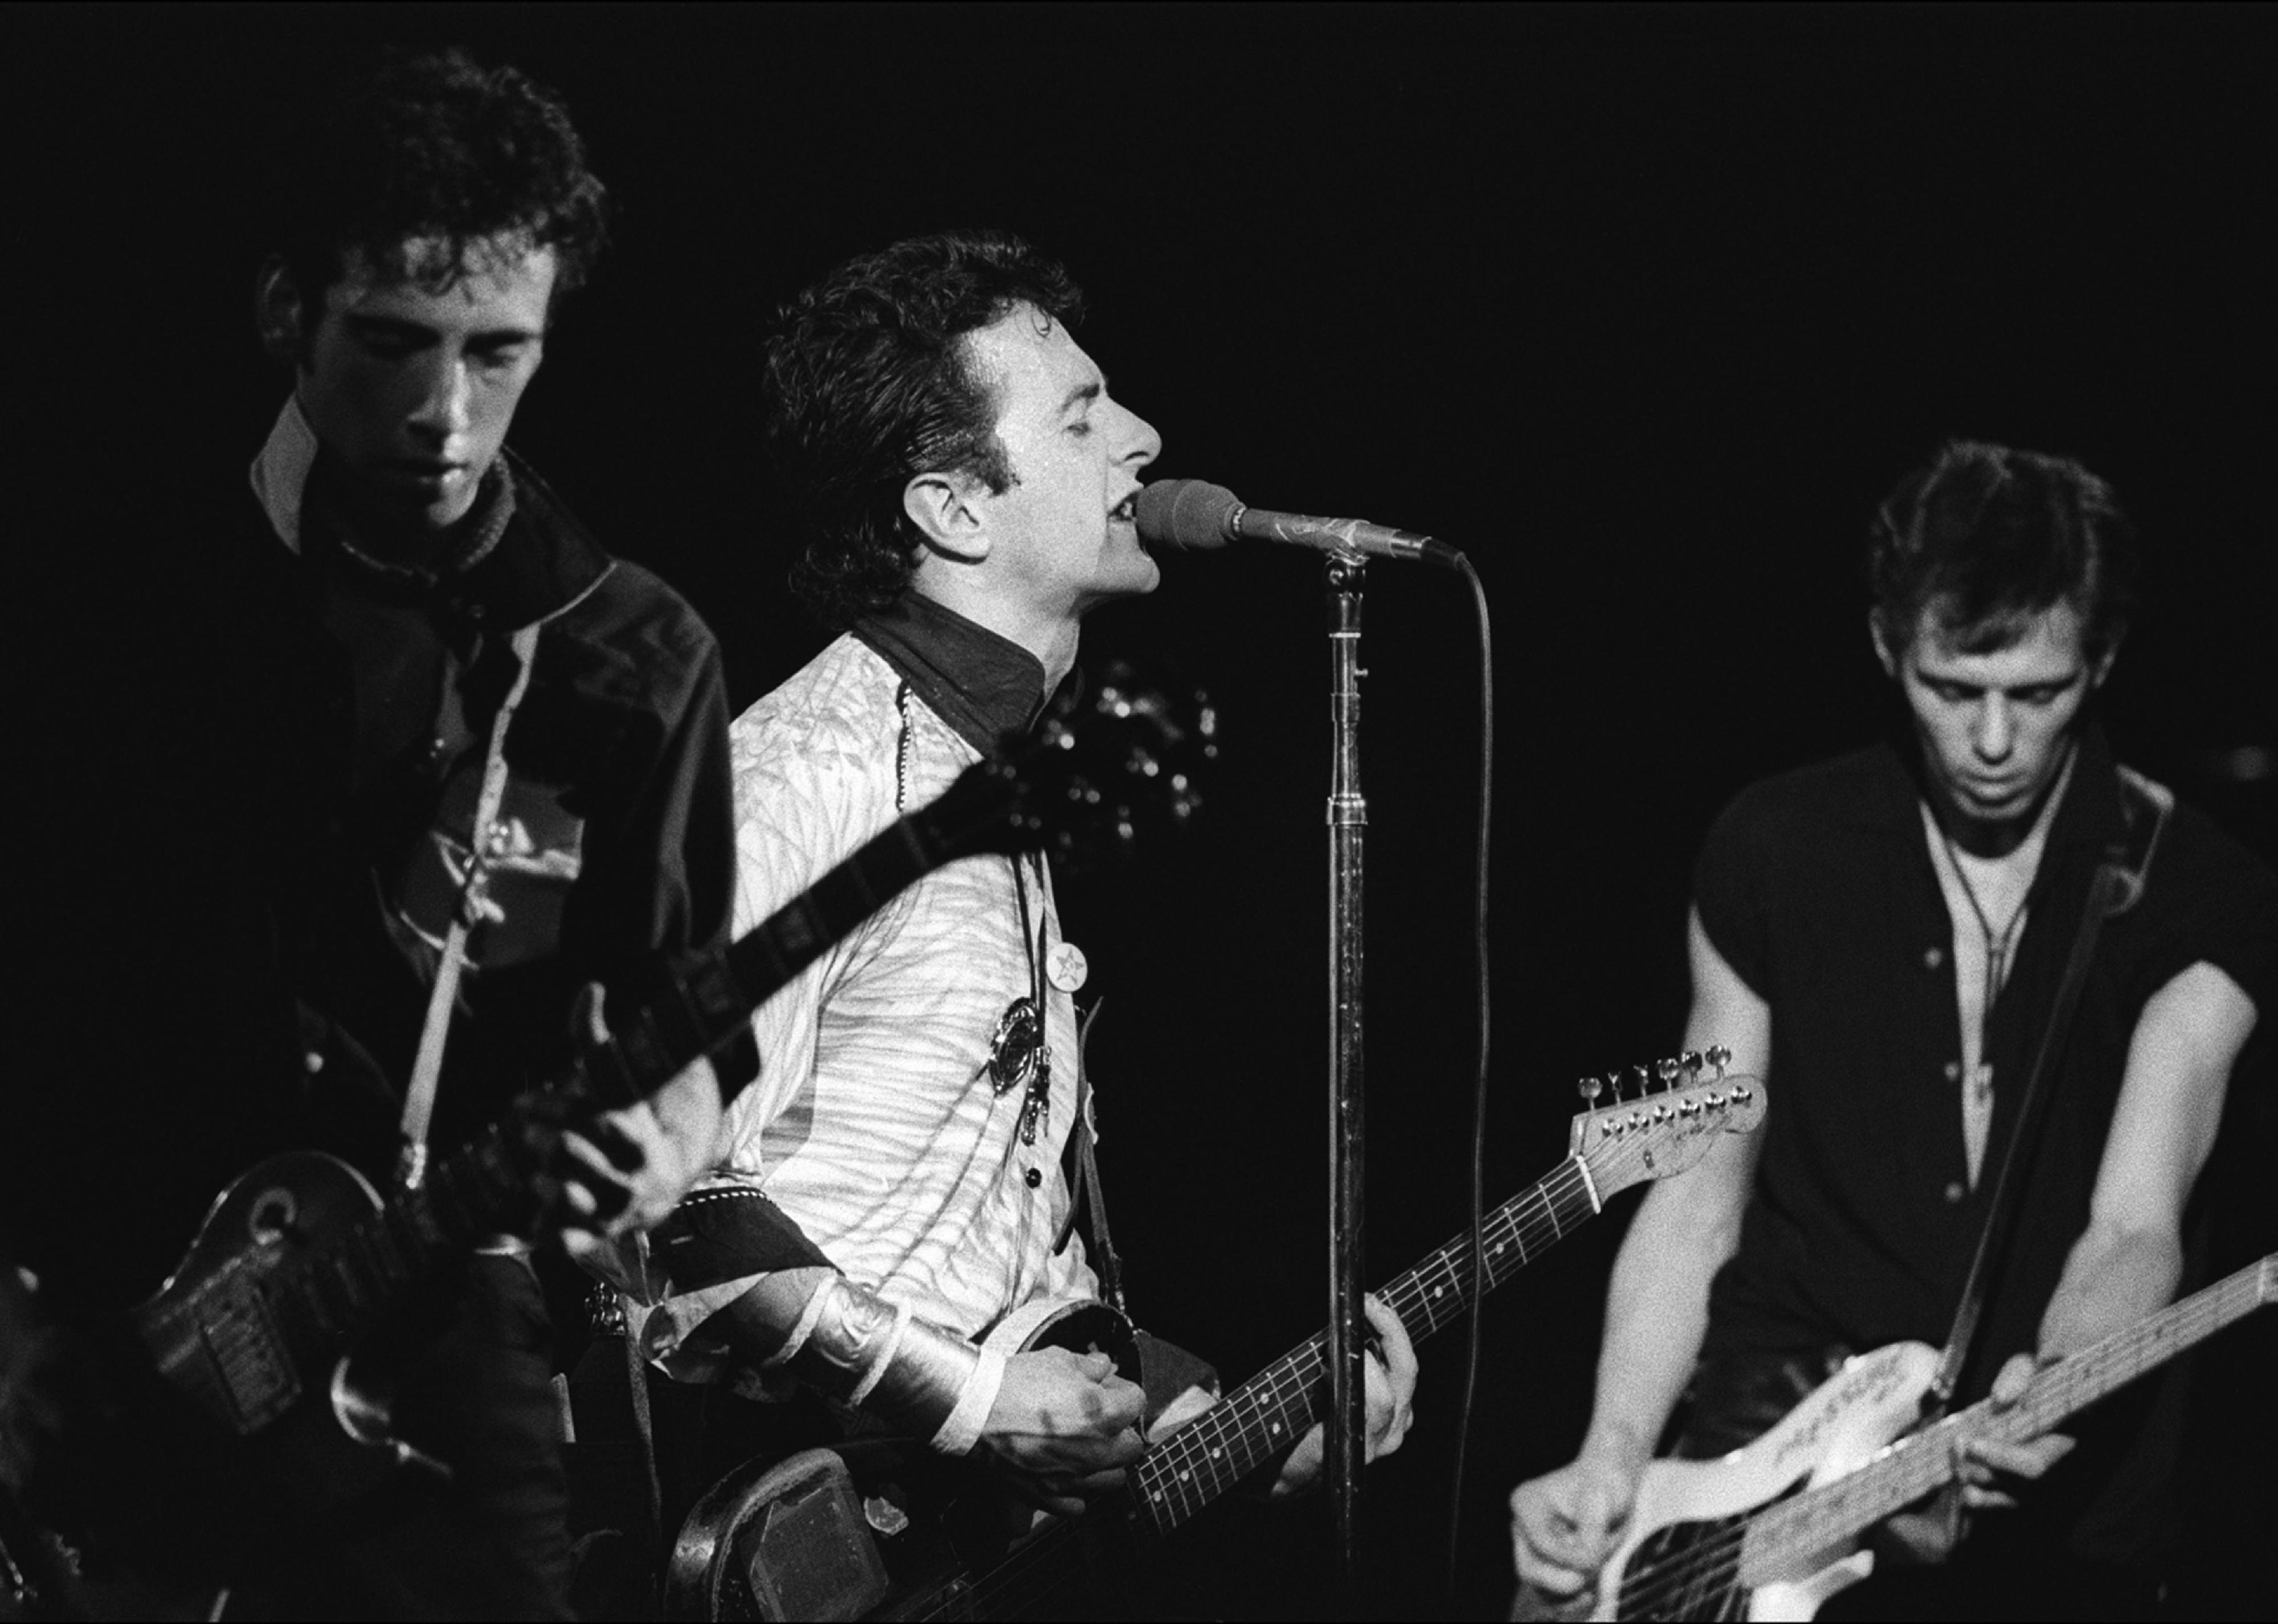 Members of the British Punk group the Clash perform onstage at the Palladium.